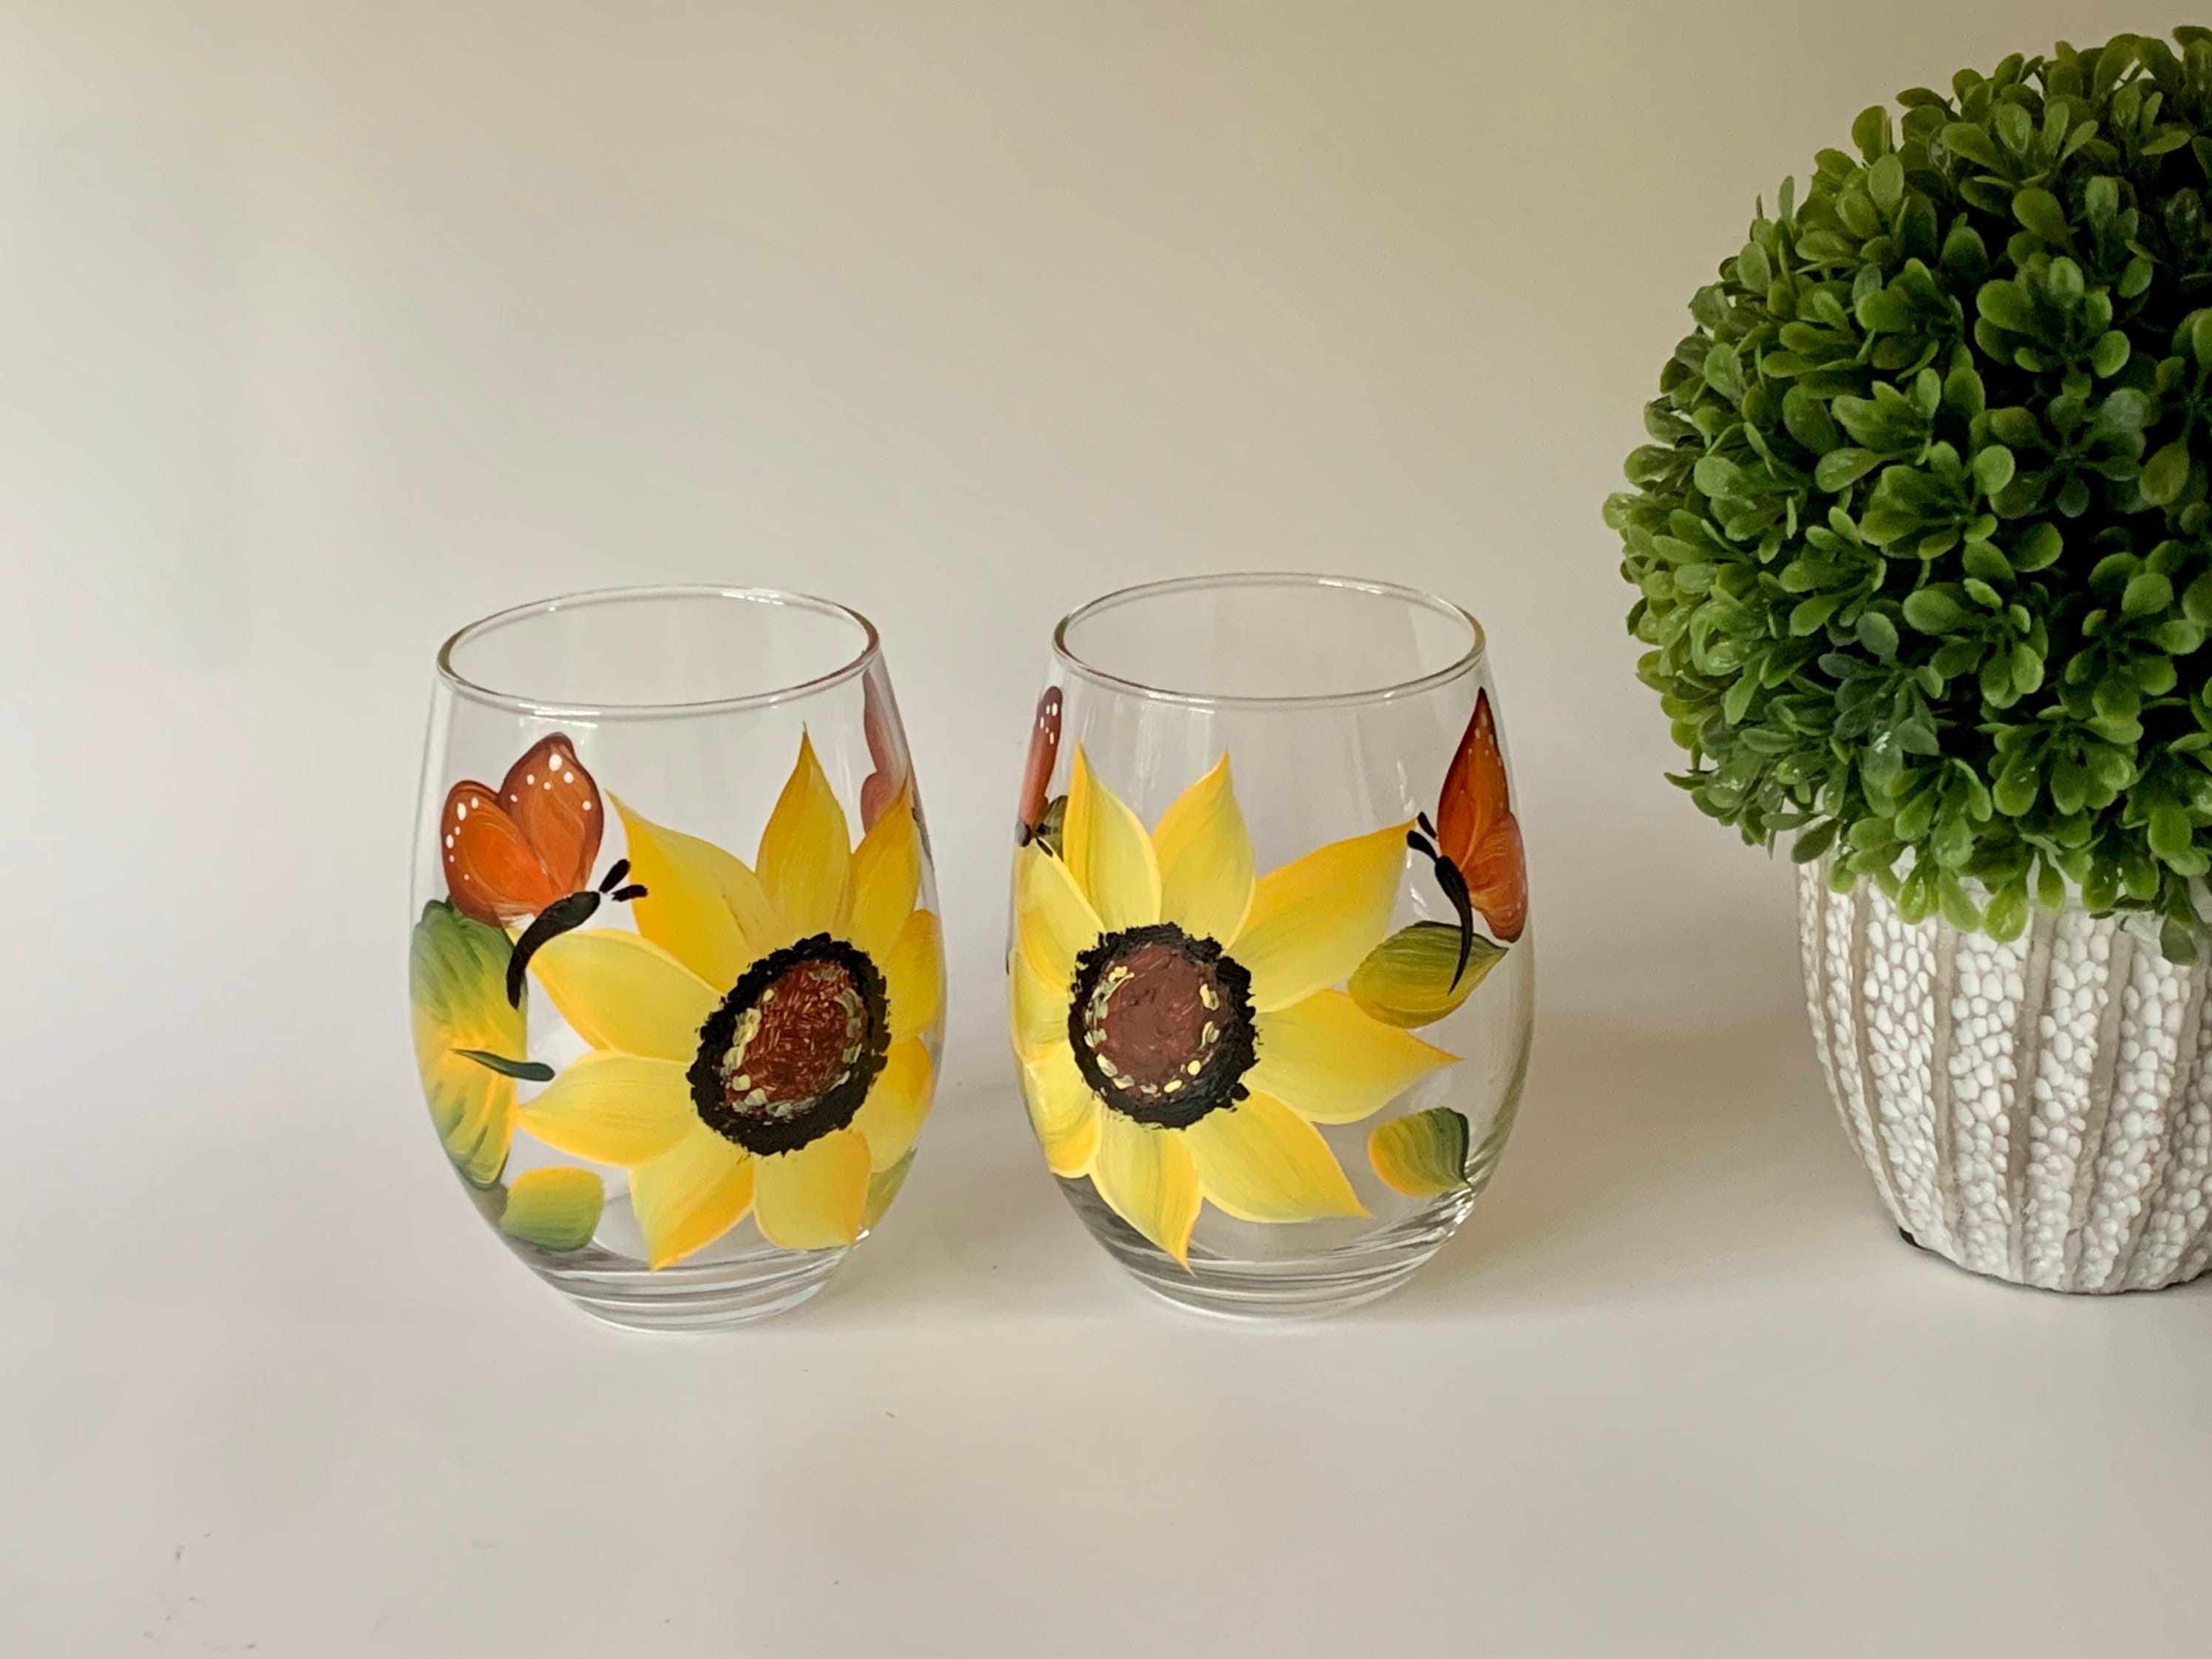 sunflower wedding gift monarch butterflies step mom gift Painted stemless wine glasses with sunflowers 21st birthday gift for her